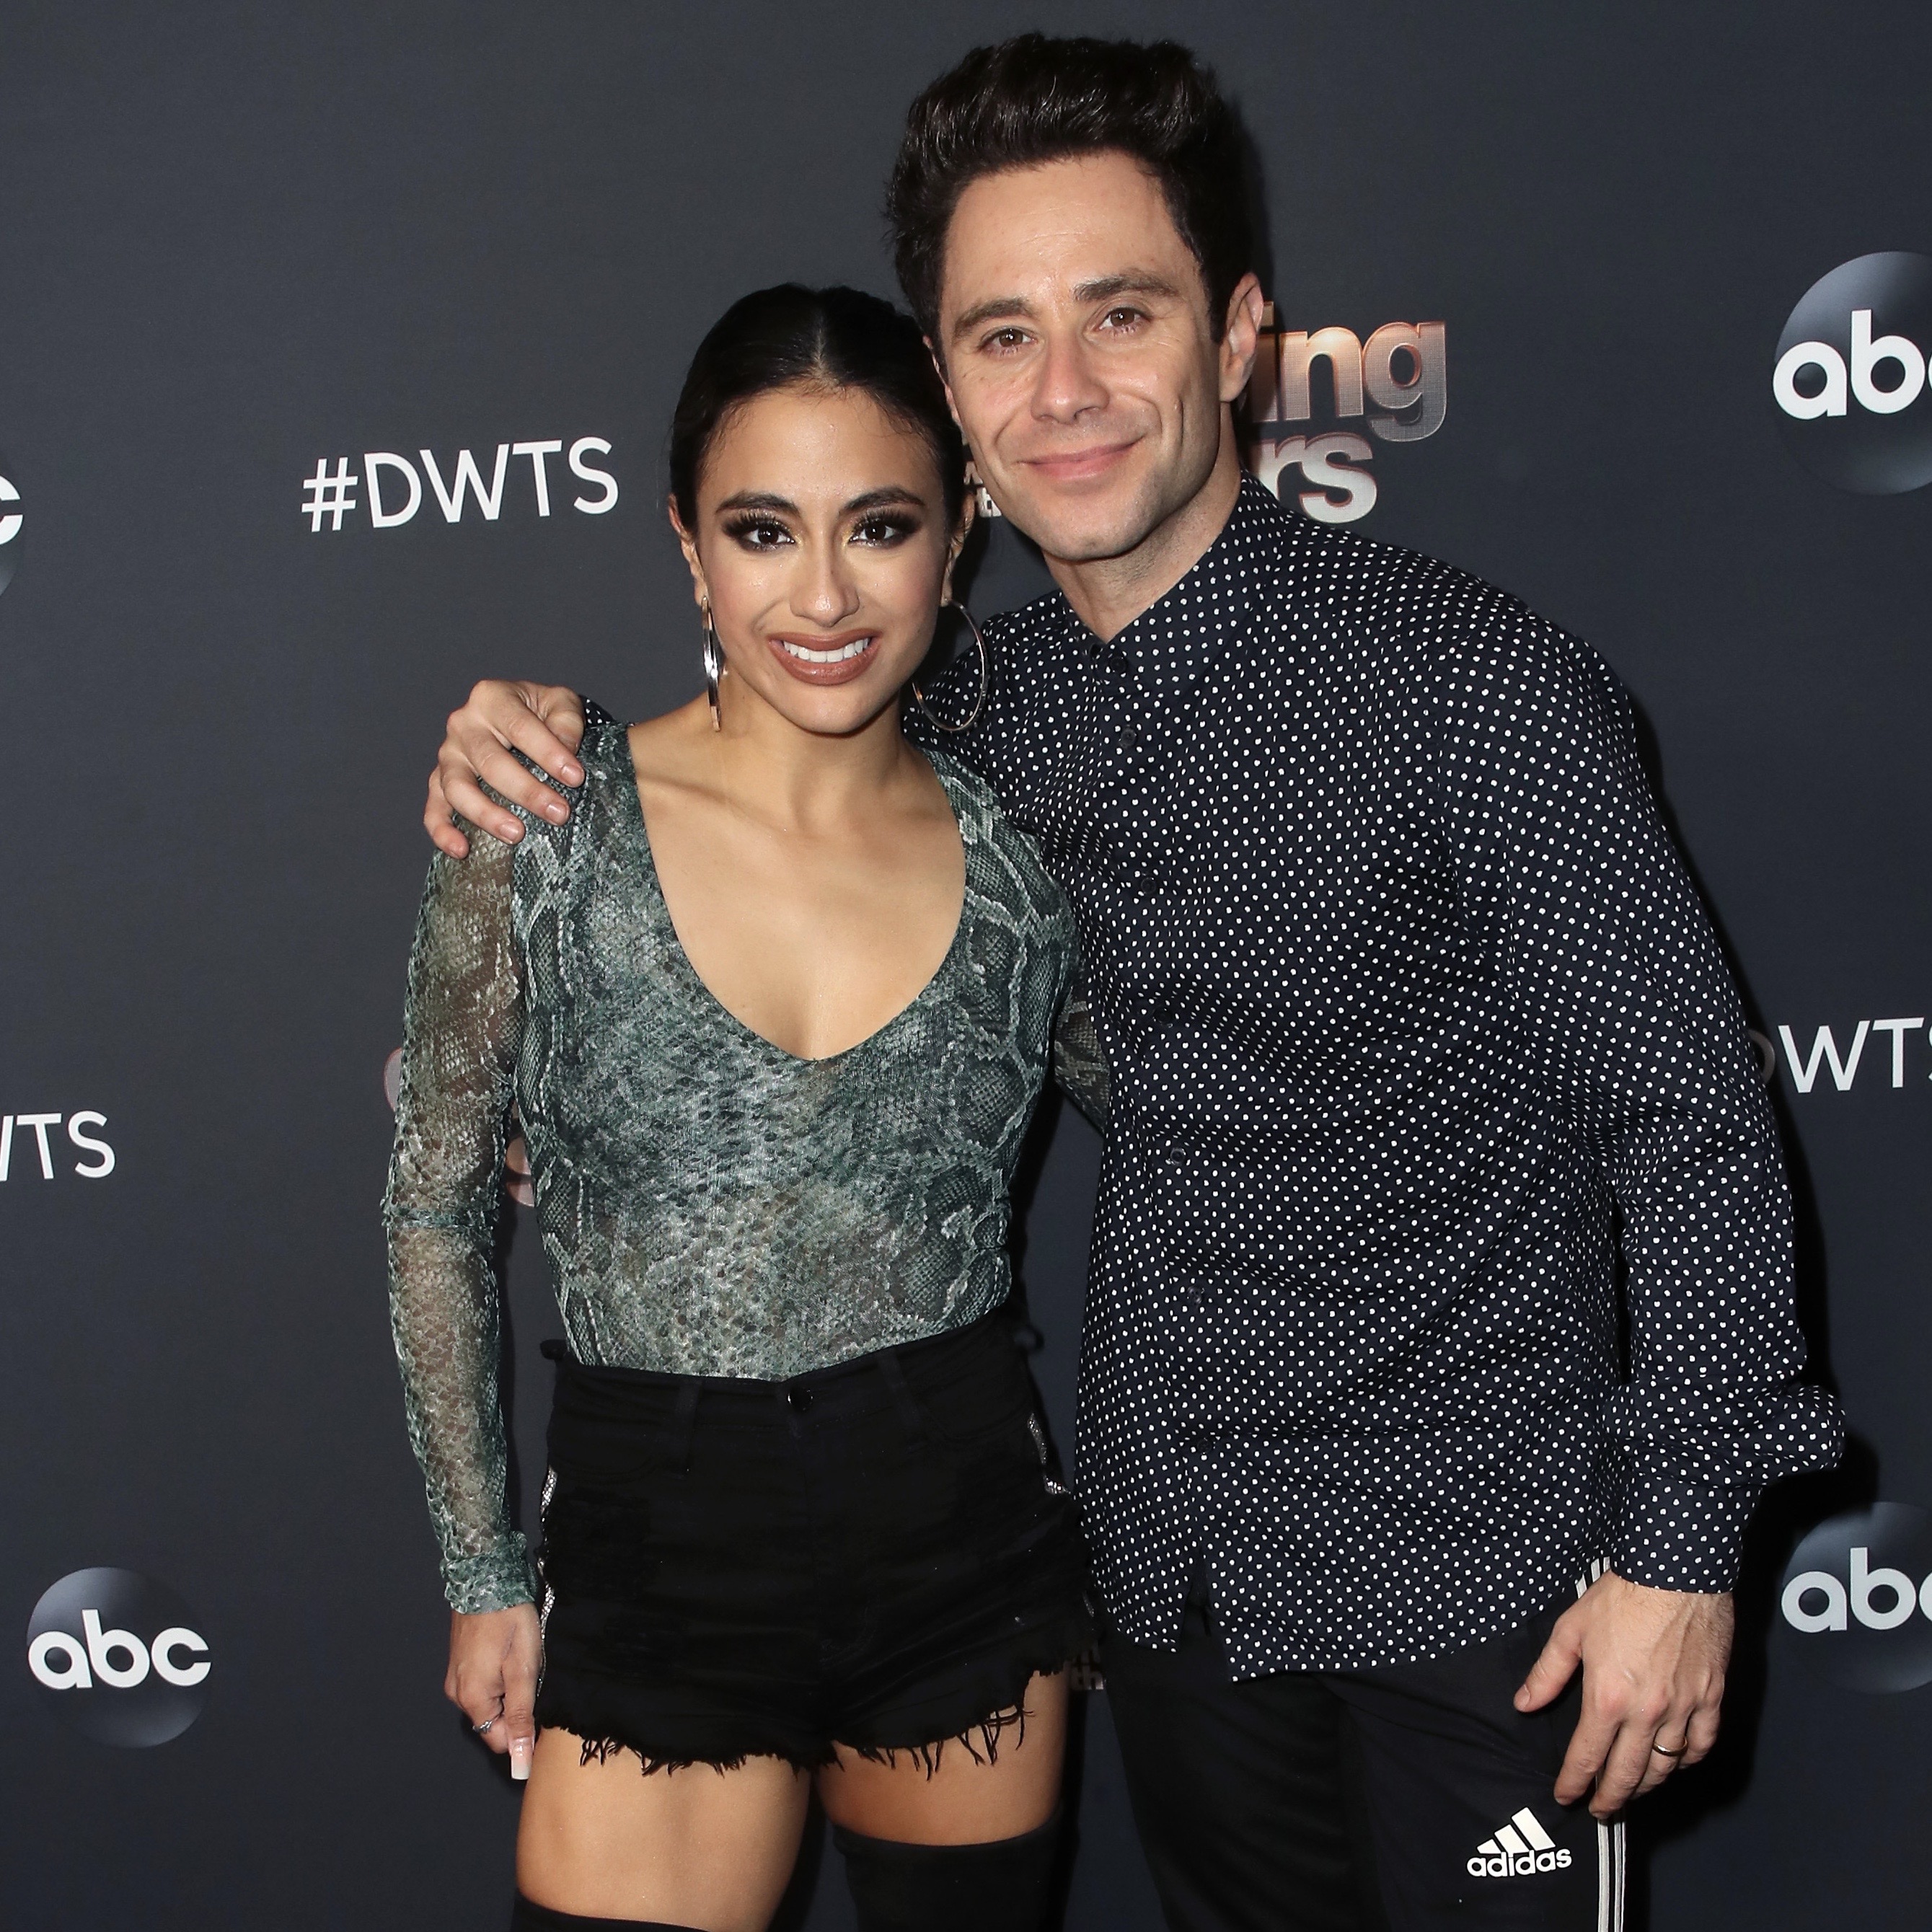 "Dancing With The Stars" Season 28 Top 6 Finalists - November 4, 2019 - Arrivals